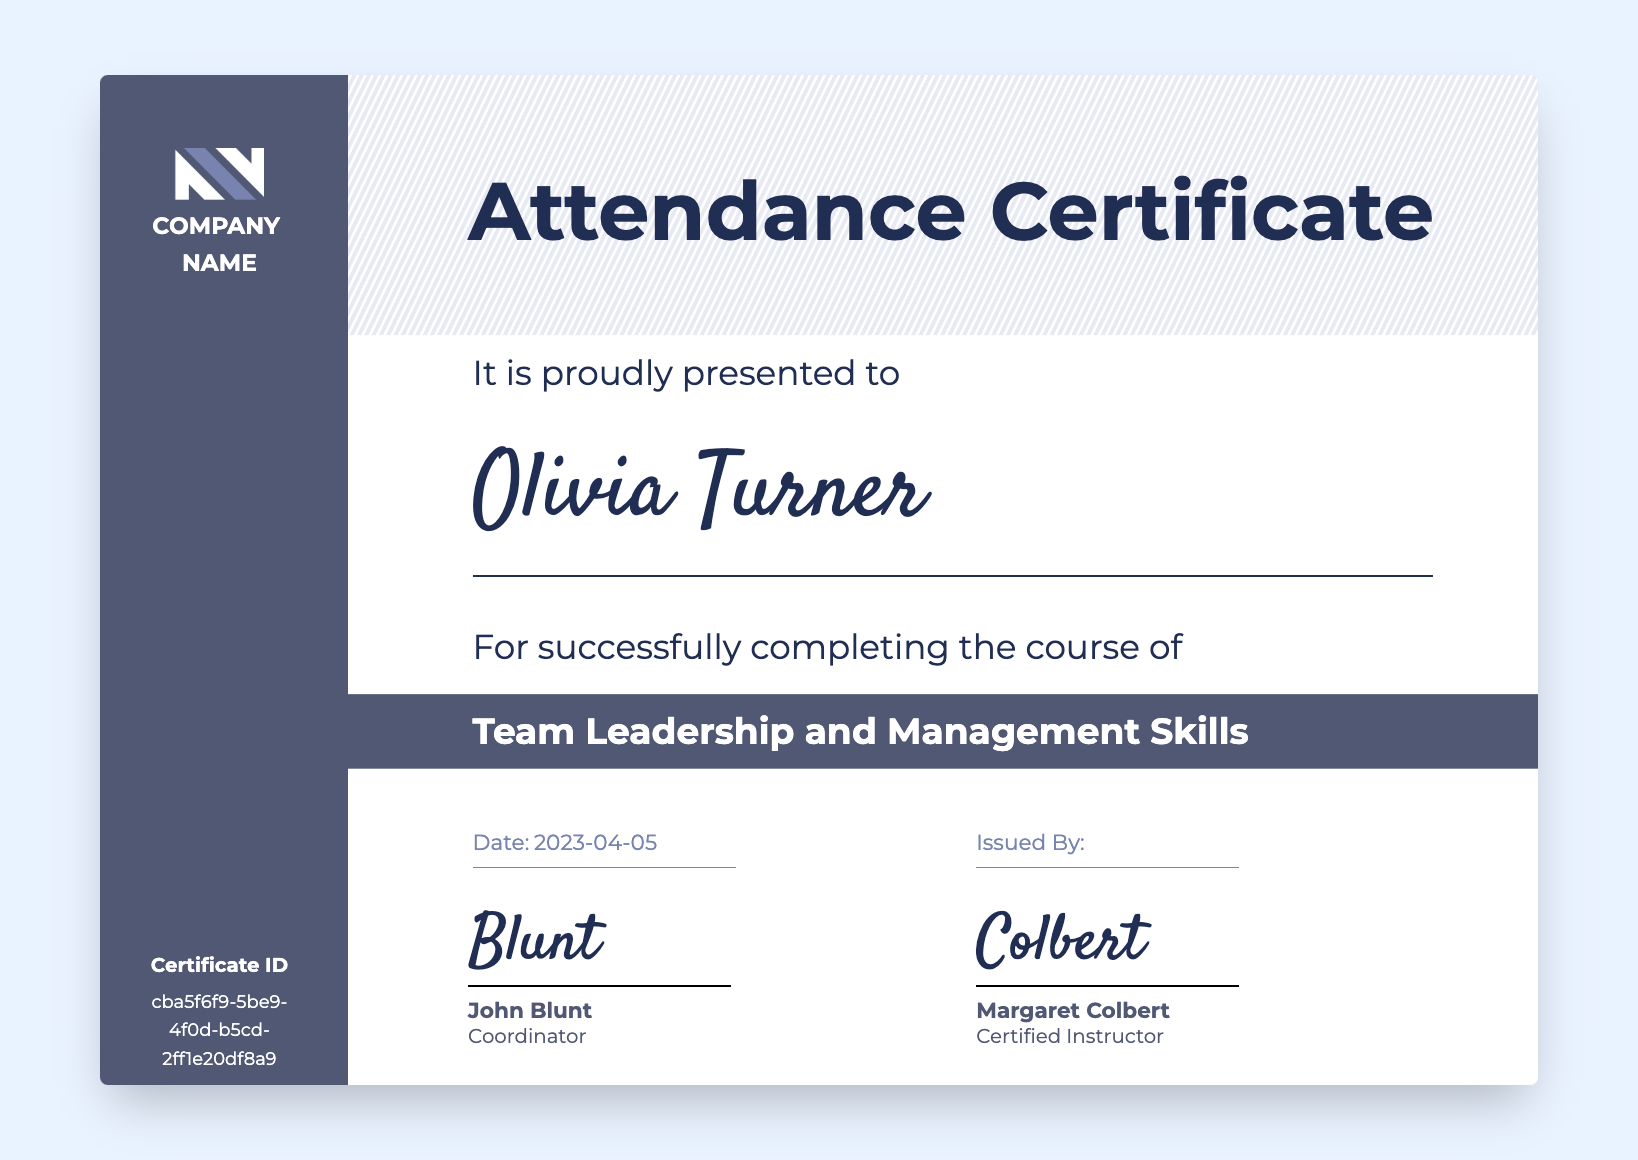 Grey attendance certificate with clear and minimalistic layout.